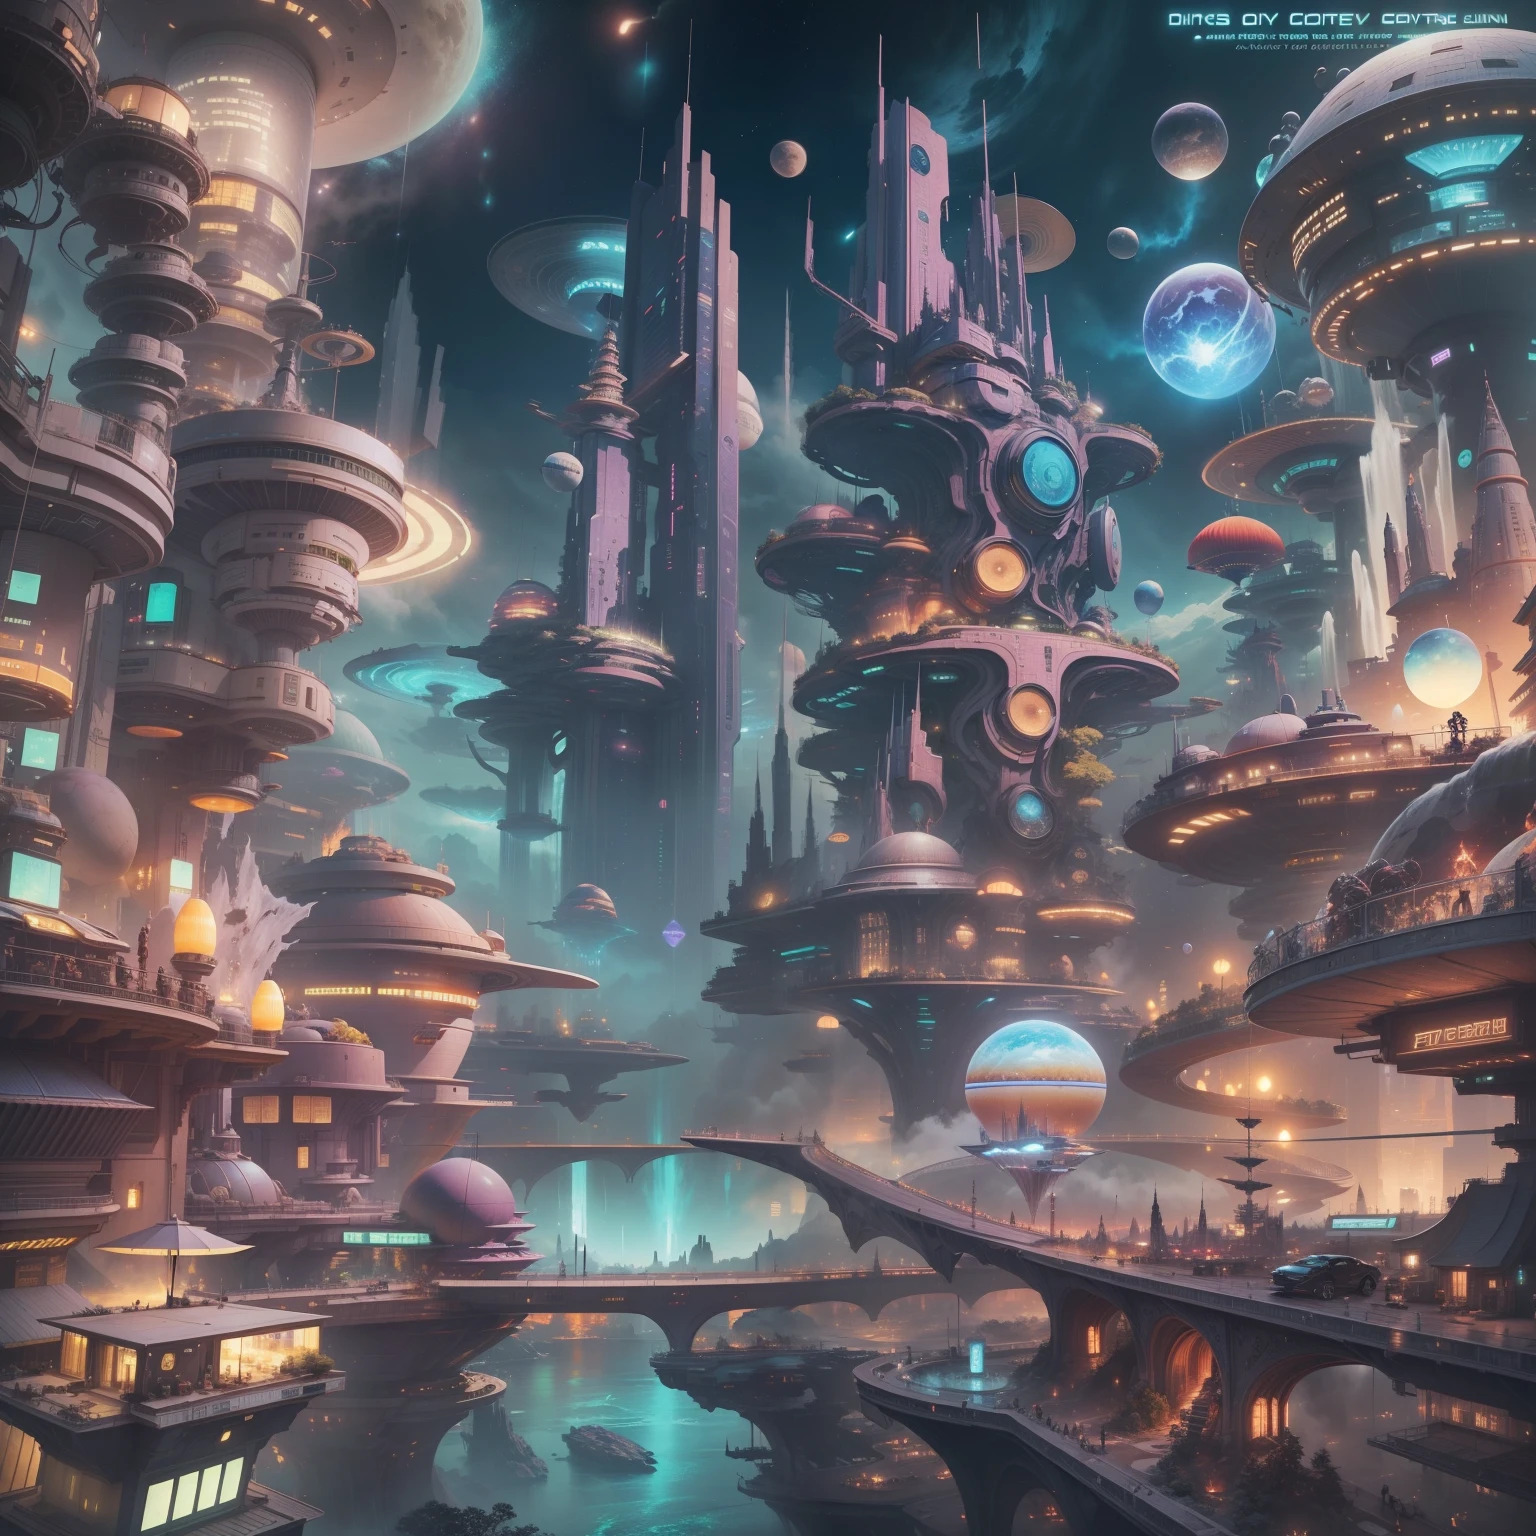 Space City、Futuristic cities、alien、floating in the universe、cyberpunked、The streets are lined with skyscrapers、A space station、Super huge waterfall、top-quality、​masterpiece、２４century、dream、utopian、planet earth、World of Dreams、Fantasia、𝓡𝓸𝓶𝓪𝓷𝓽𝓲𝓬、Beautiful city